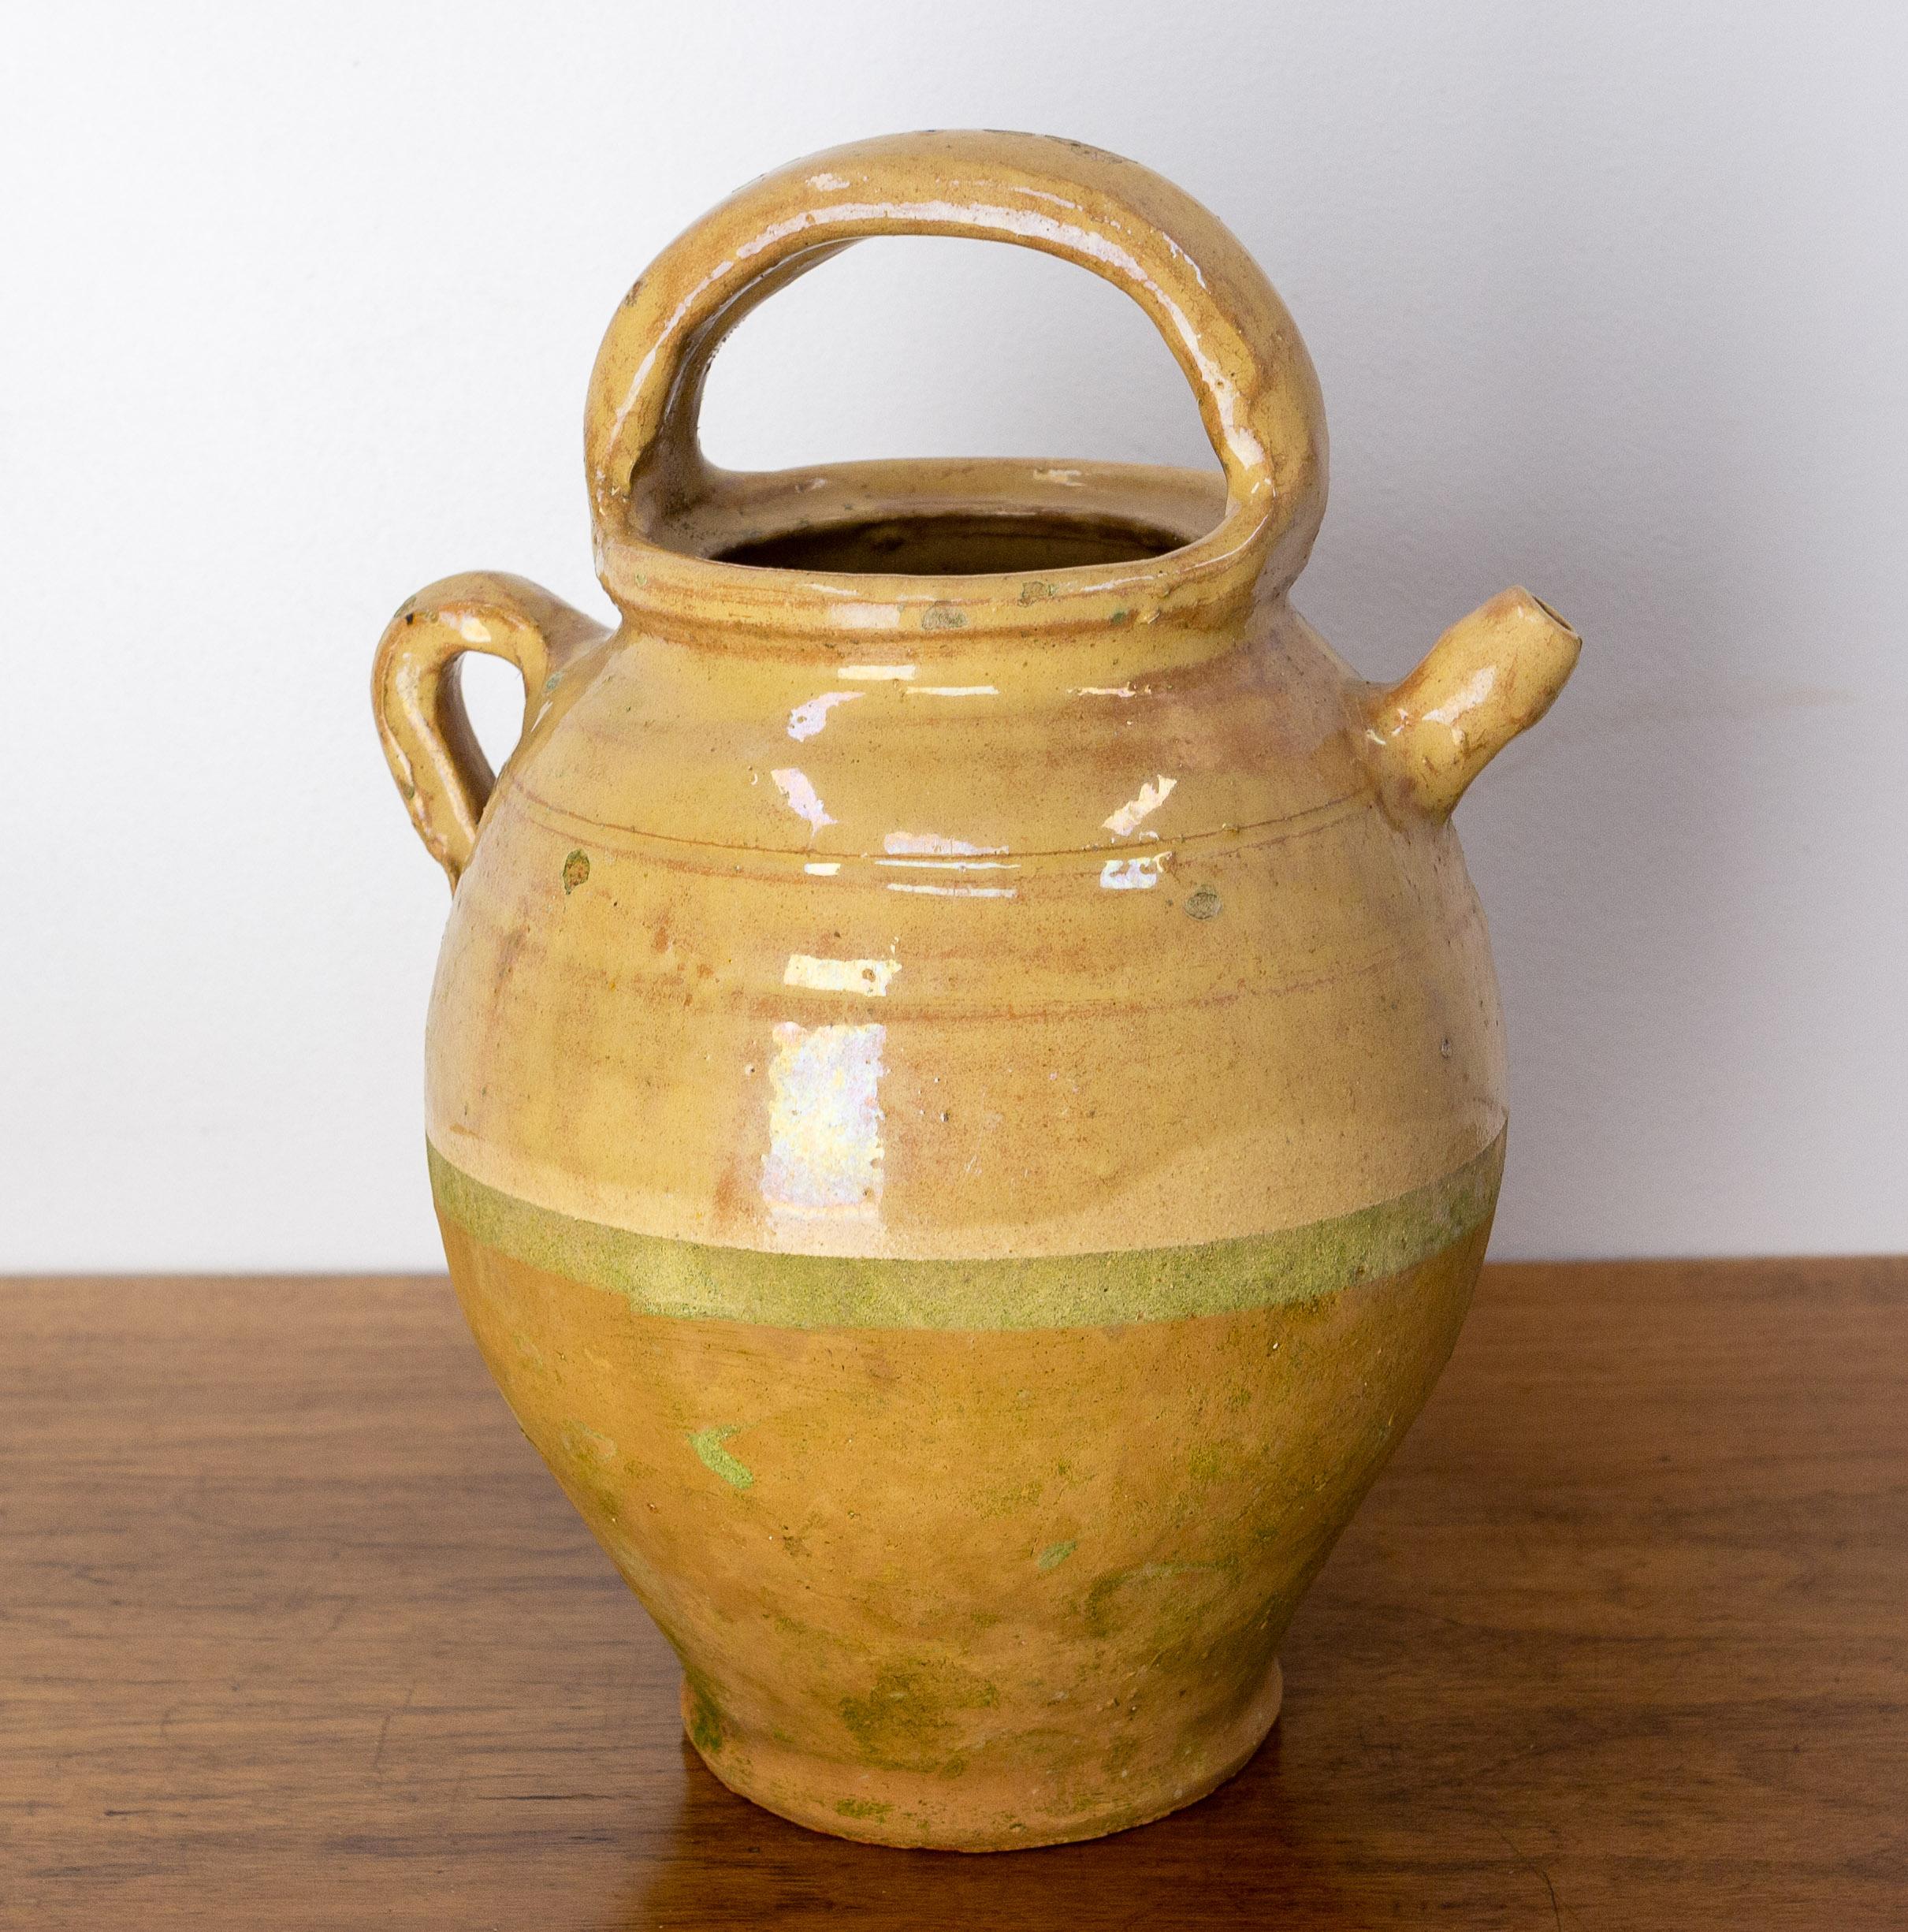 Terracotta jug with yellow glaze. This kind of pitcher was used to keep the water fresh, at a time when electricity did not exist.
Very decorative.
Good patina.
Good antique condition with a small splinter on the collar, nothing